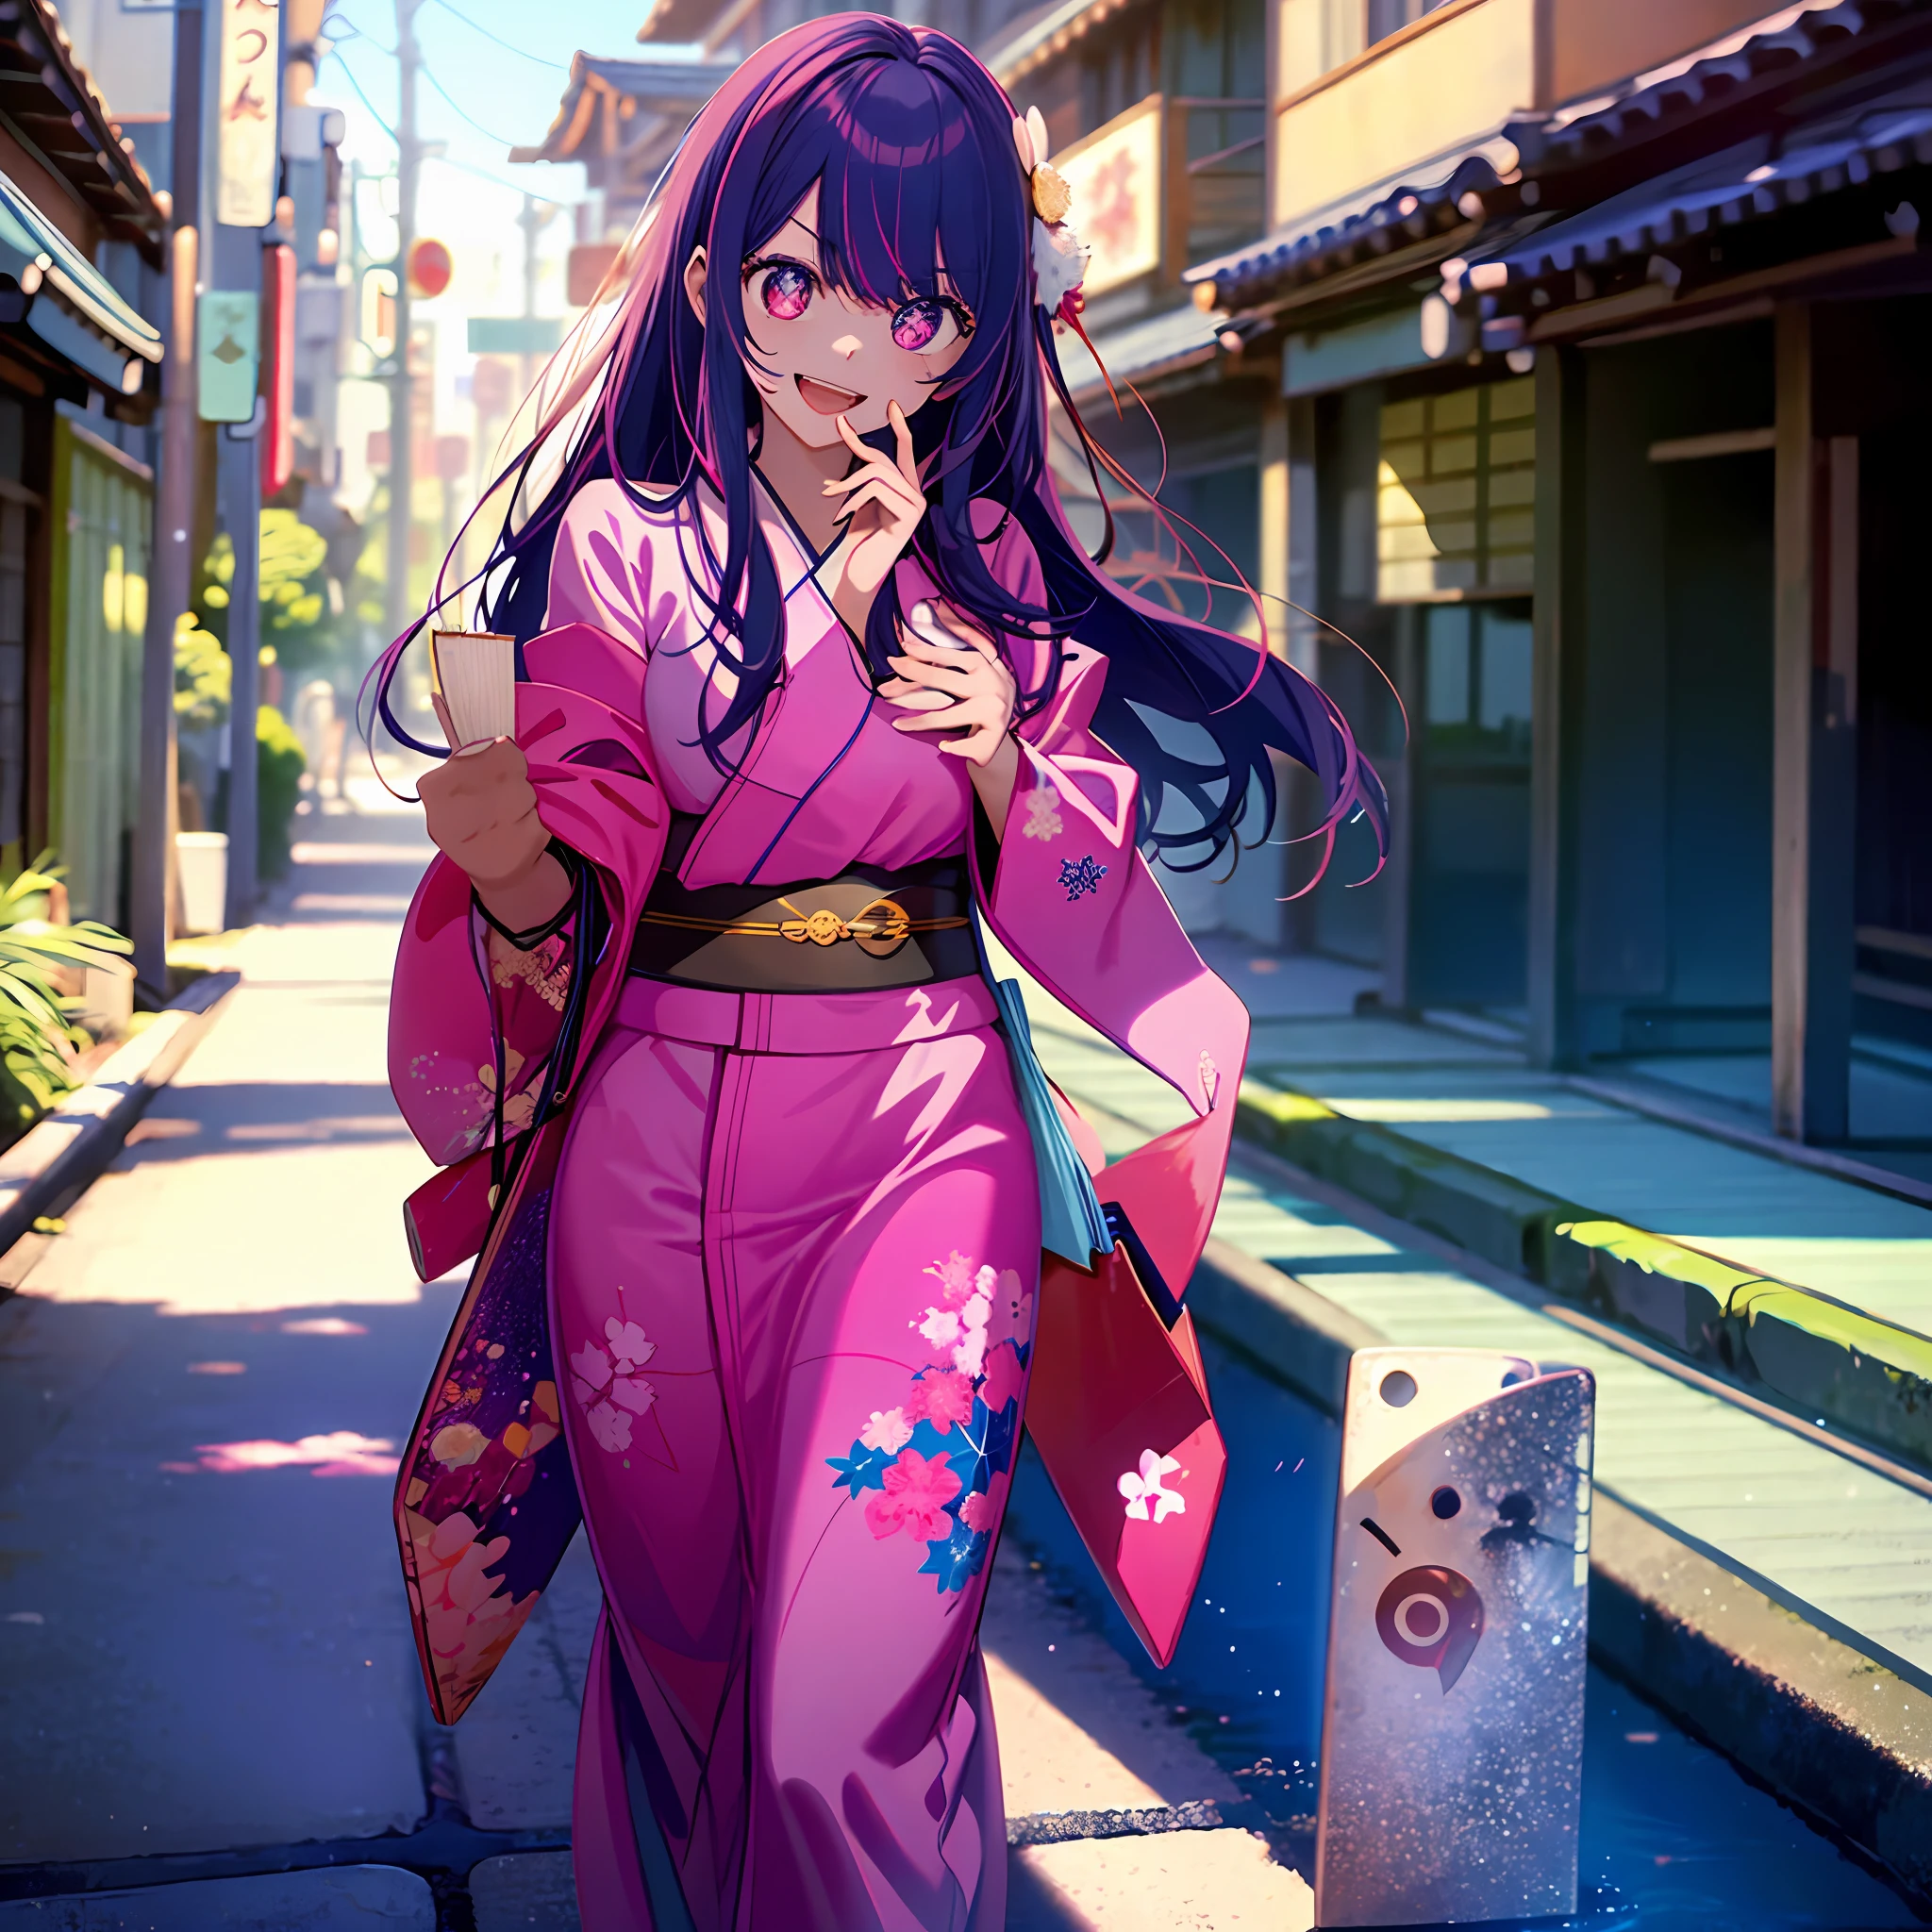 (Best Quality, Masterpiece), Ai Hoshino, 1girl:1.3, (Crazy Smile:1.2) , Bangs , Full body, hands on face, purple and pink color scheme, Open mouth, (Round eyes:1.2), Glowing eyes, Left star eyes, Star eyes, Pink eyes, Colorful kimono, Japan sword, holding weapons, looking at the beholder, beautiful detailed face, smile, teeth, barefoot, sunlight, lots of lighting, Japan, shopping street,